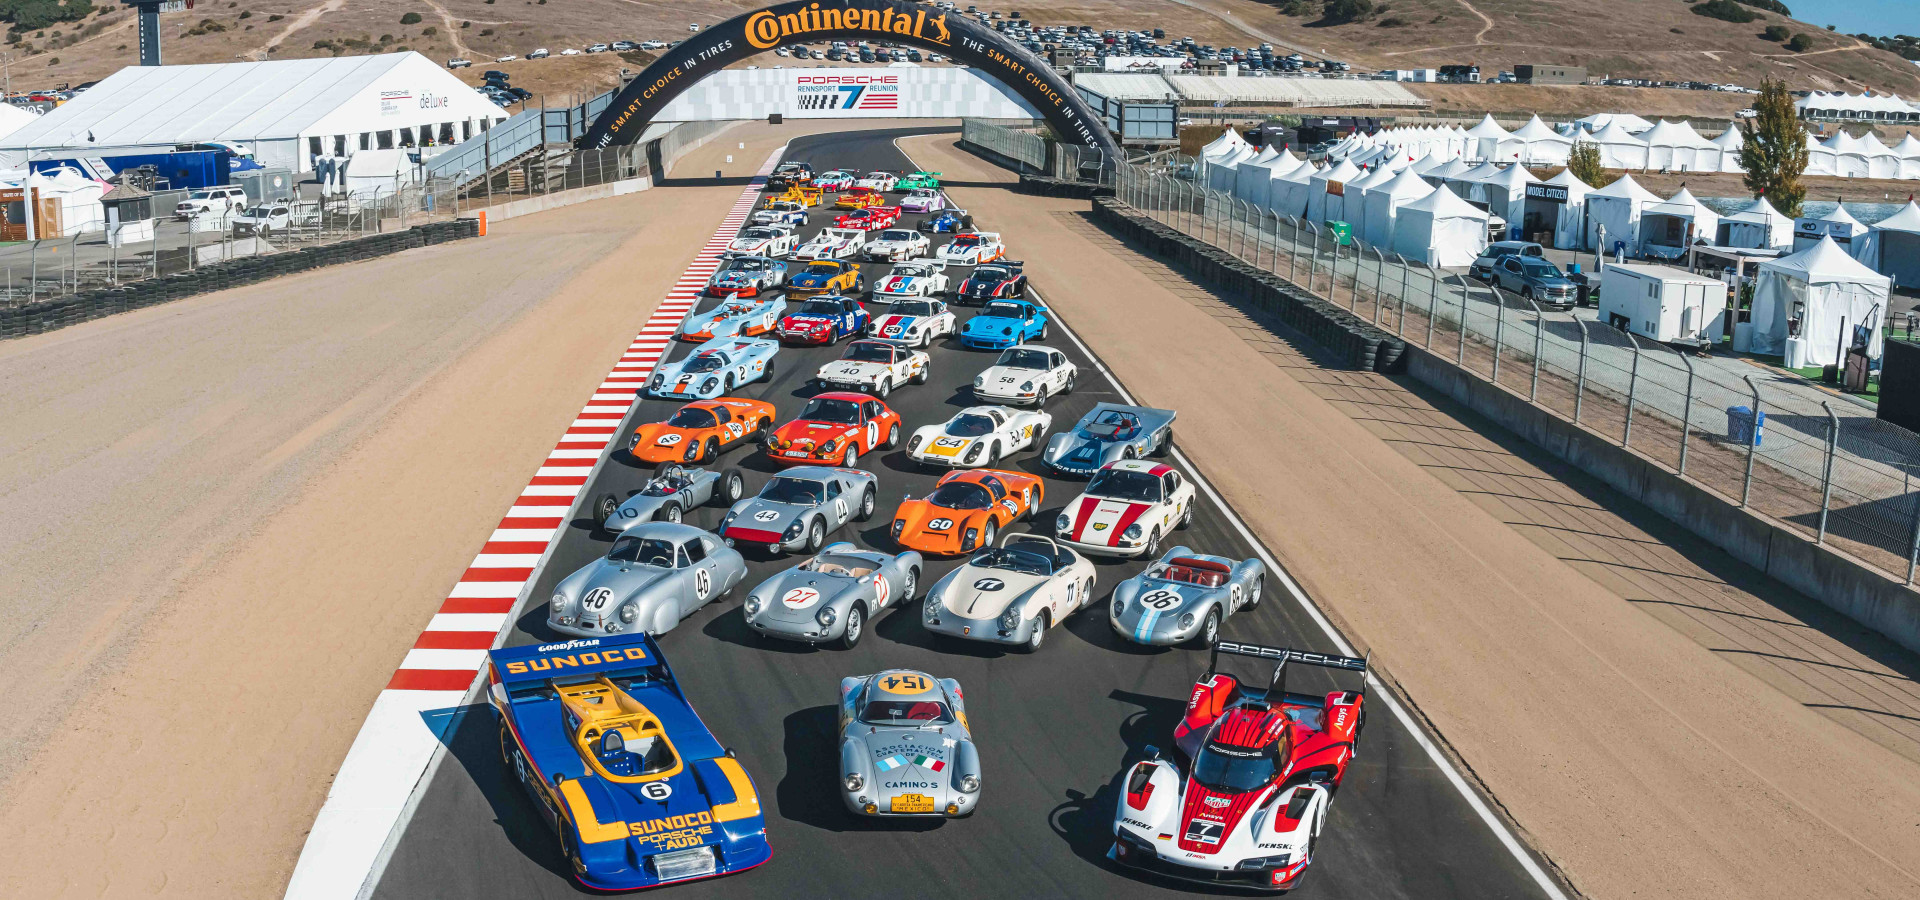 Rennsport Reunion 7: a spectacular glimpse into motorsport’s future, present and past